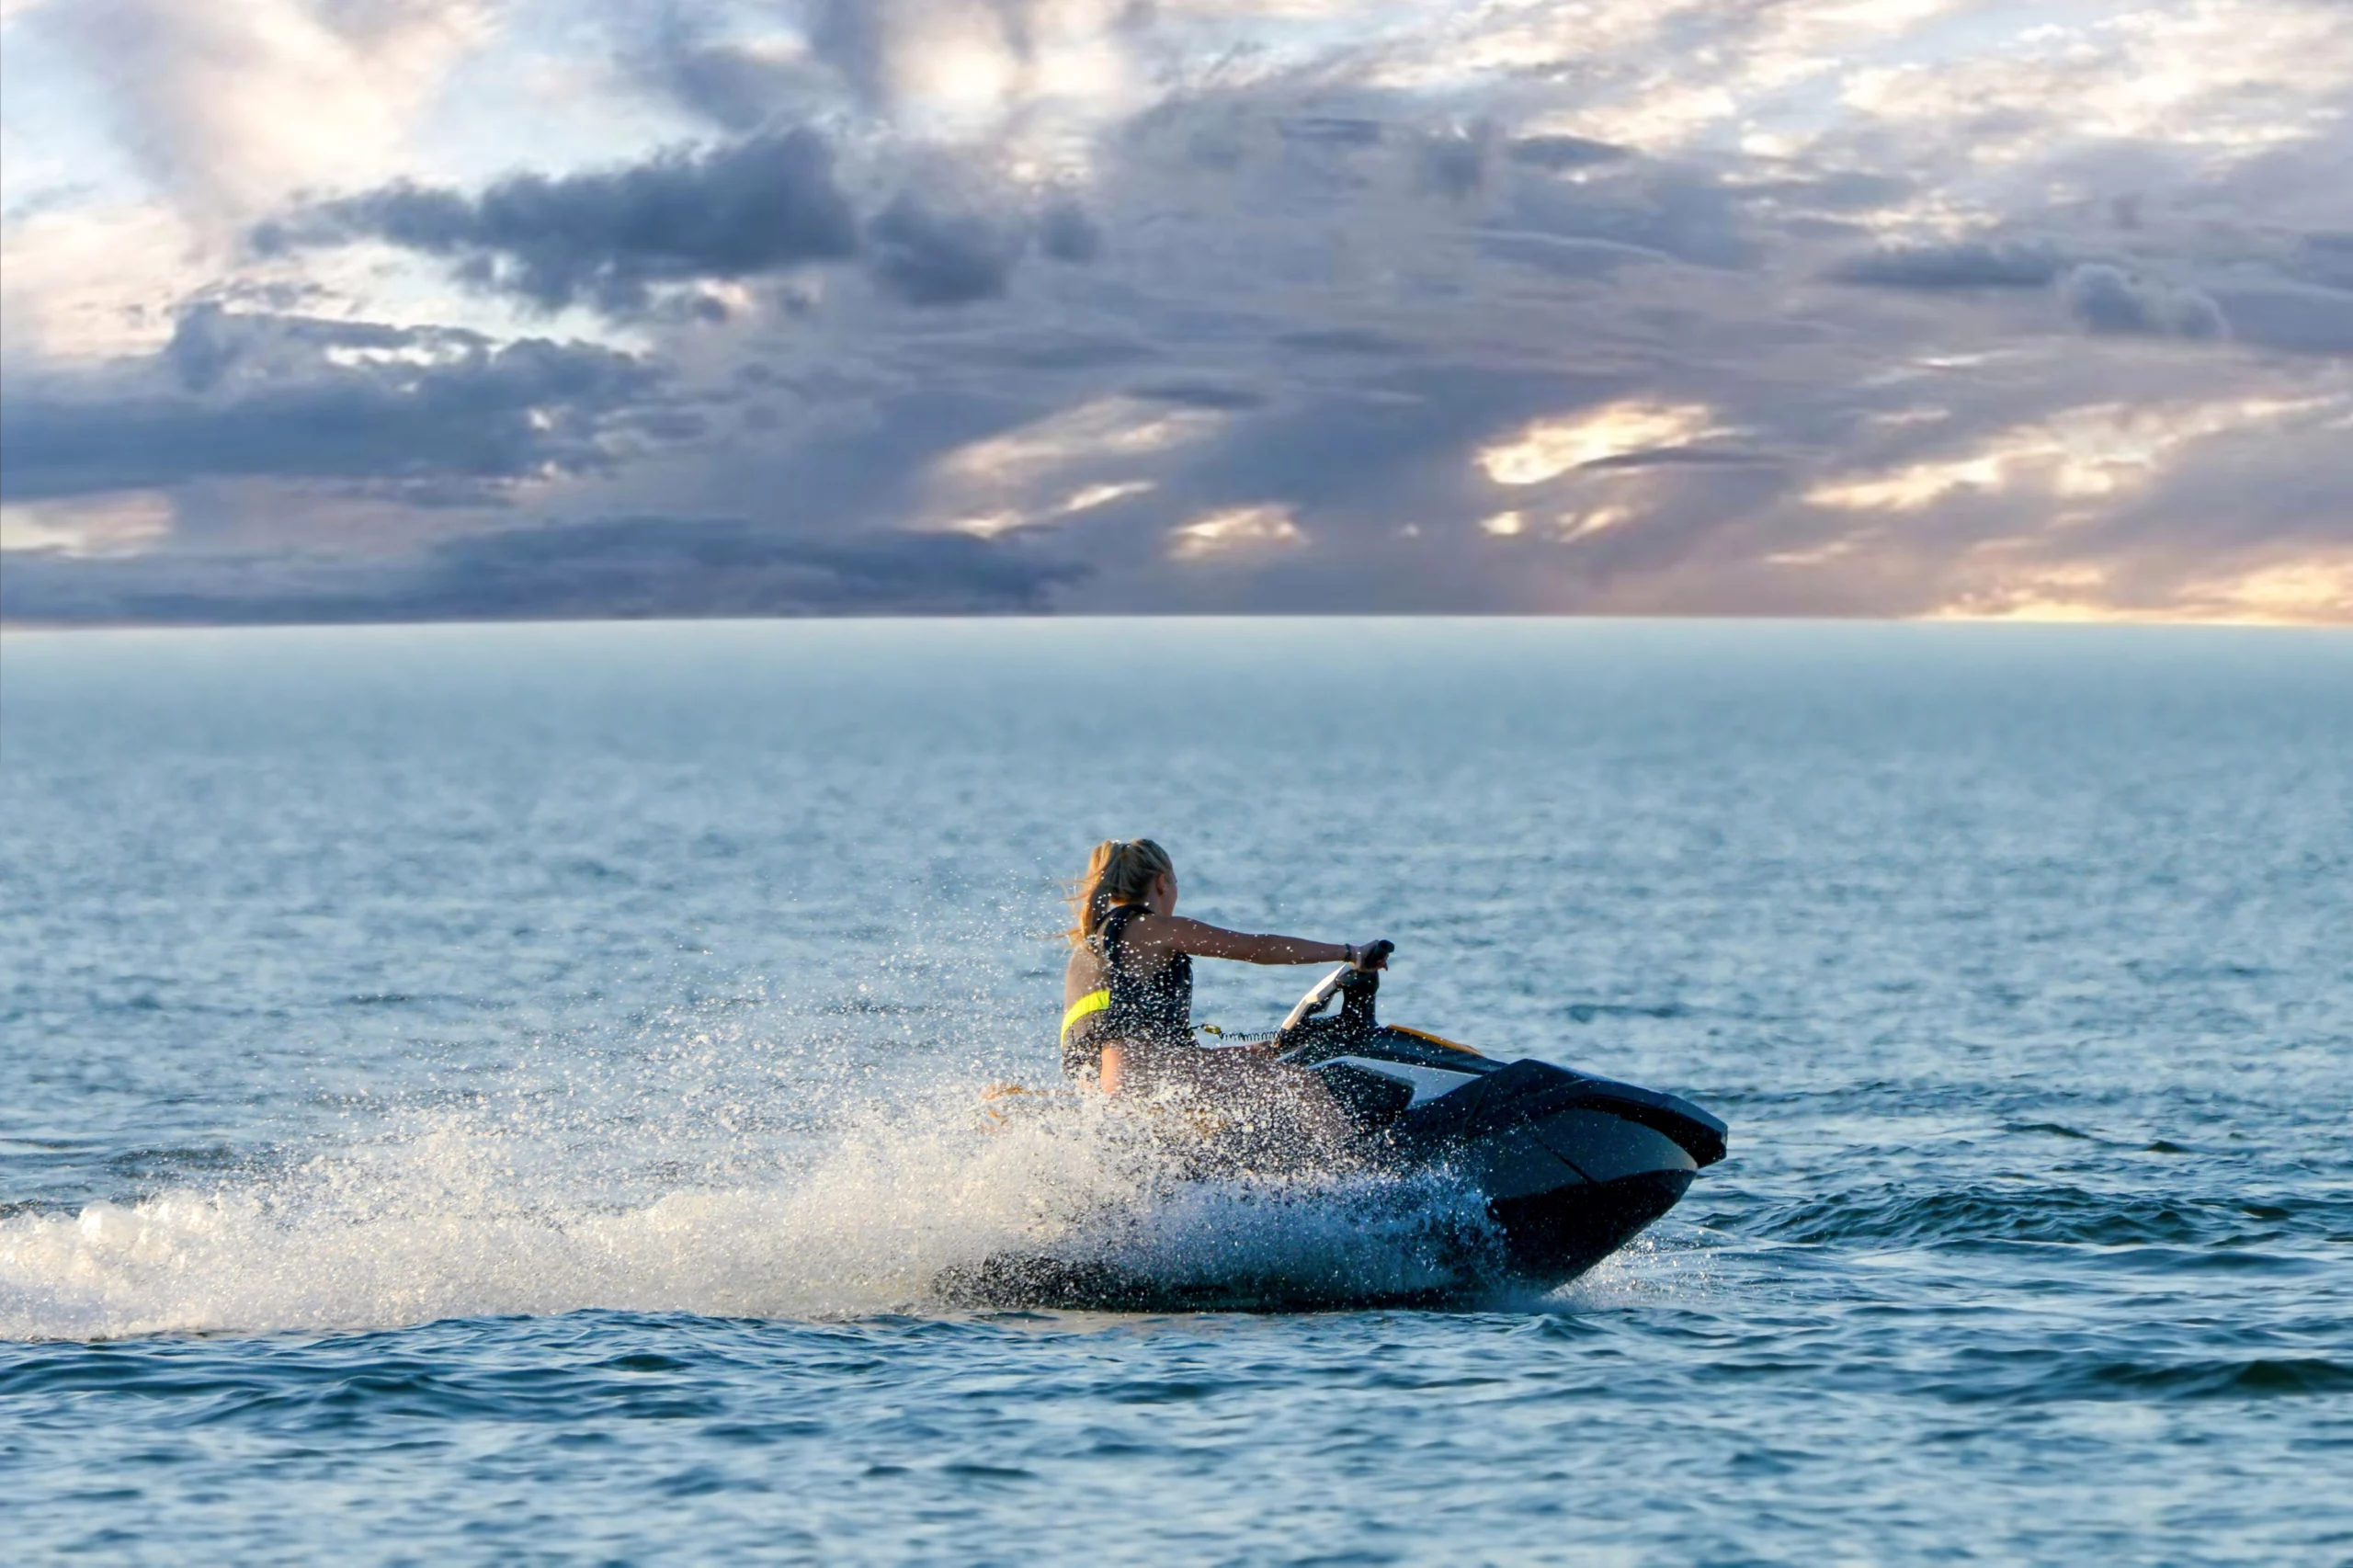 cheap but thoughtful christmas gifts: time on a jet ski | Swoosh Finance